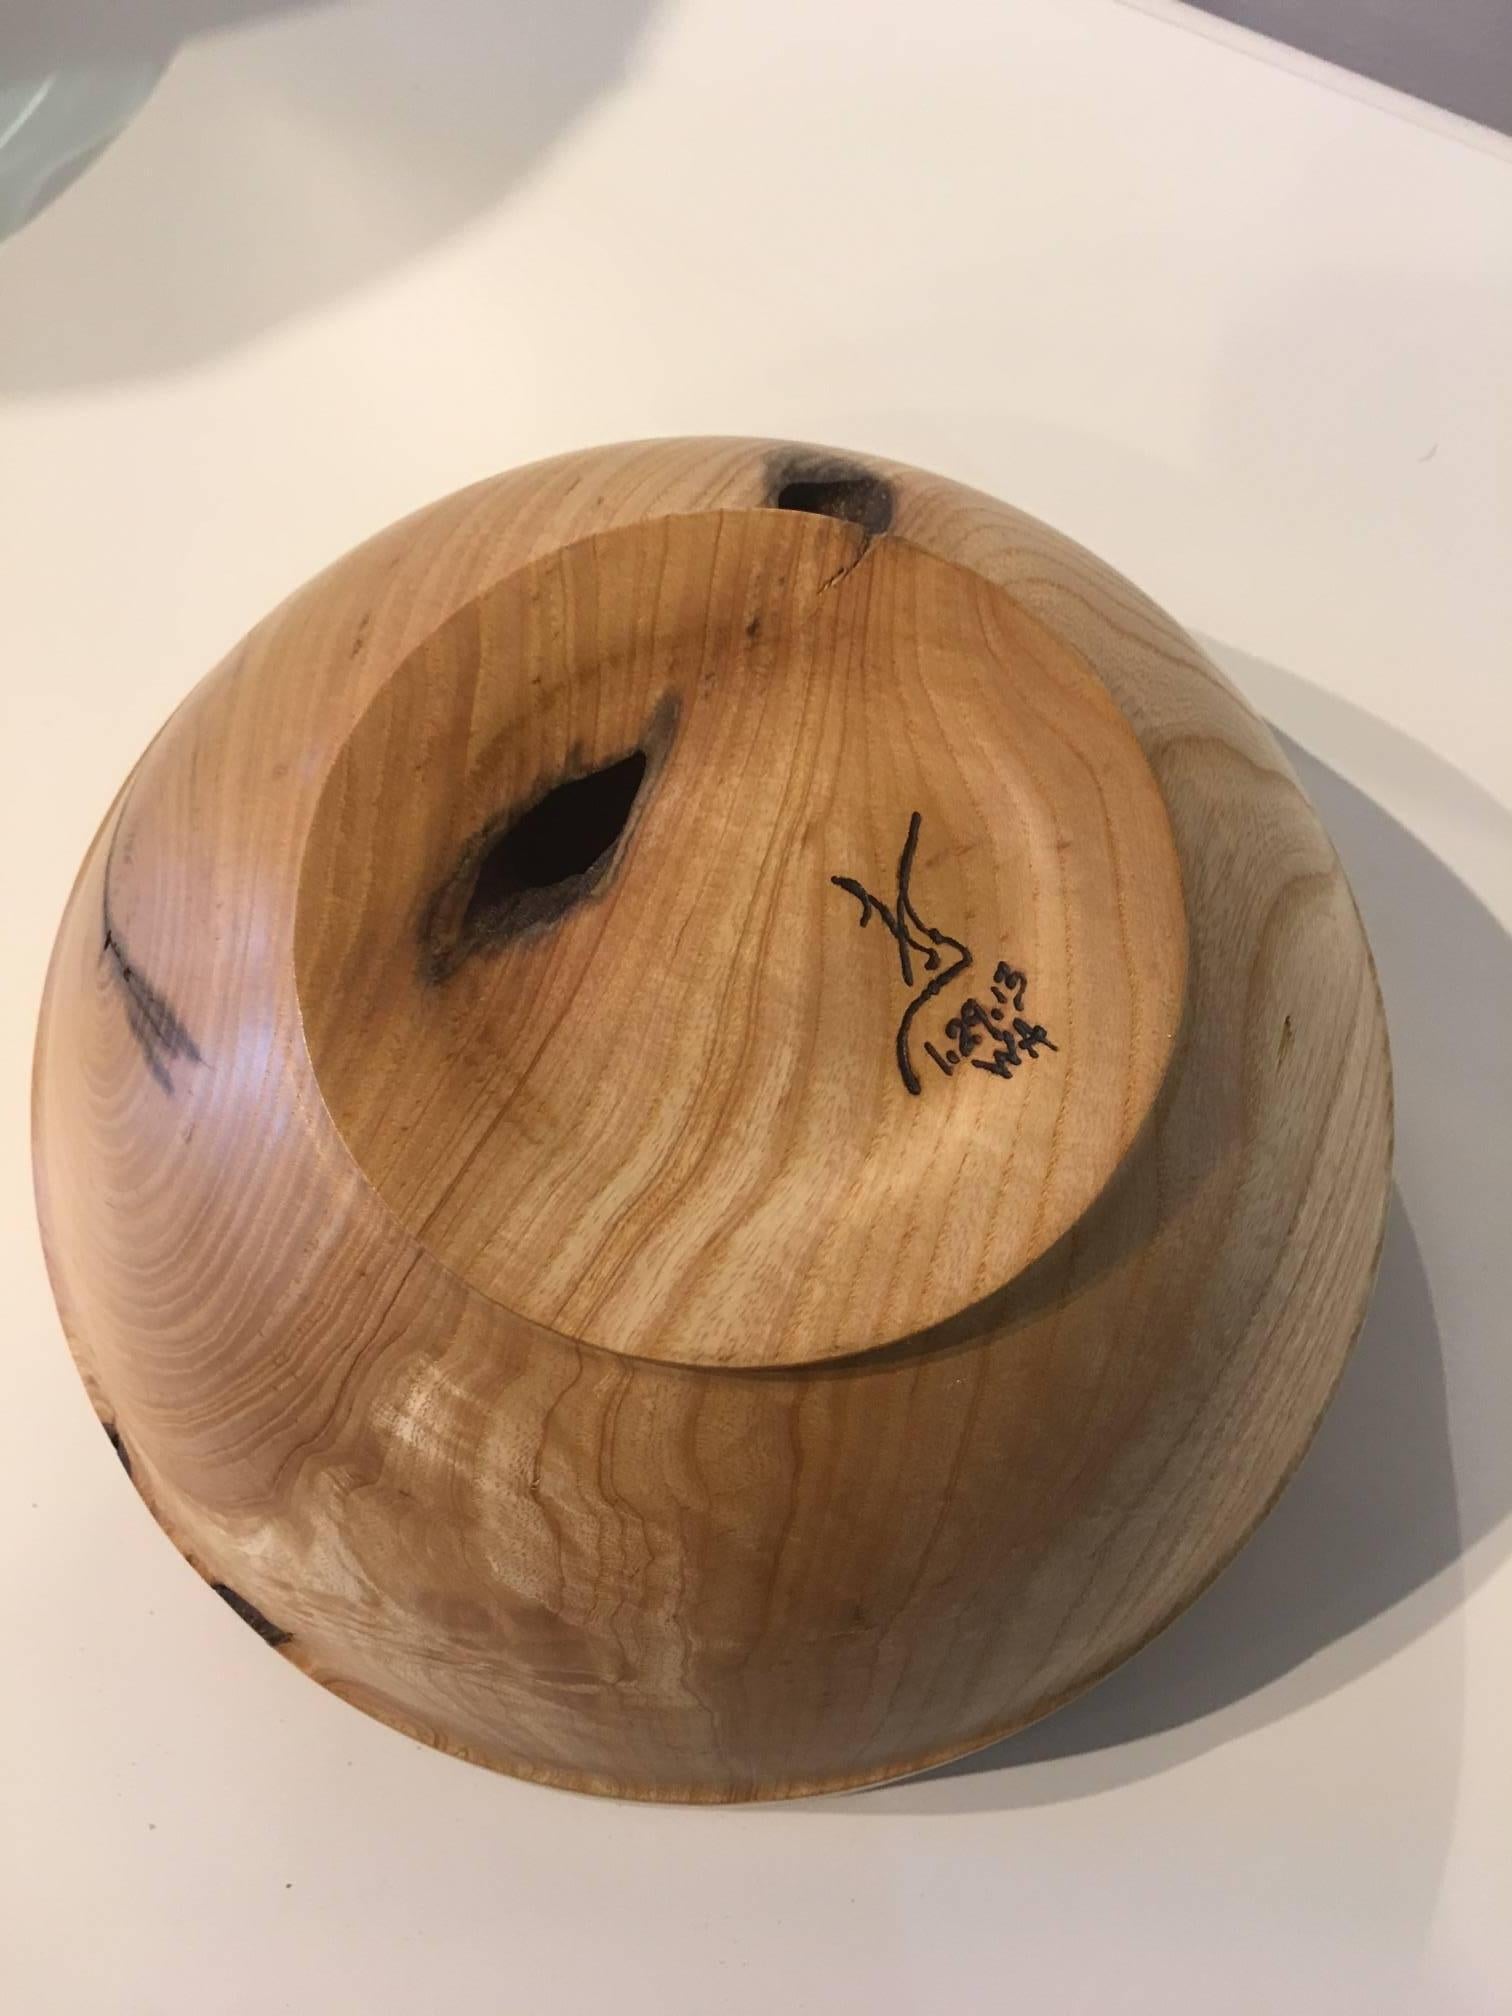 American White Ash Handcrafted Bowl